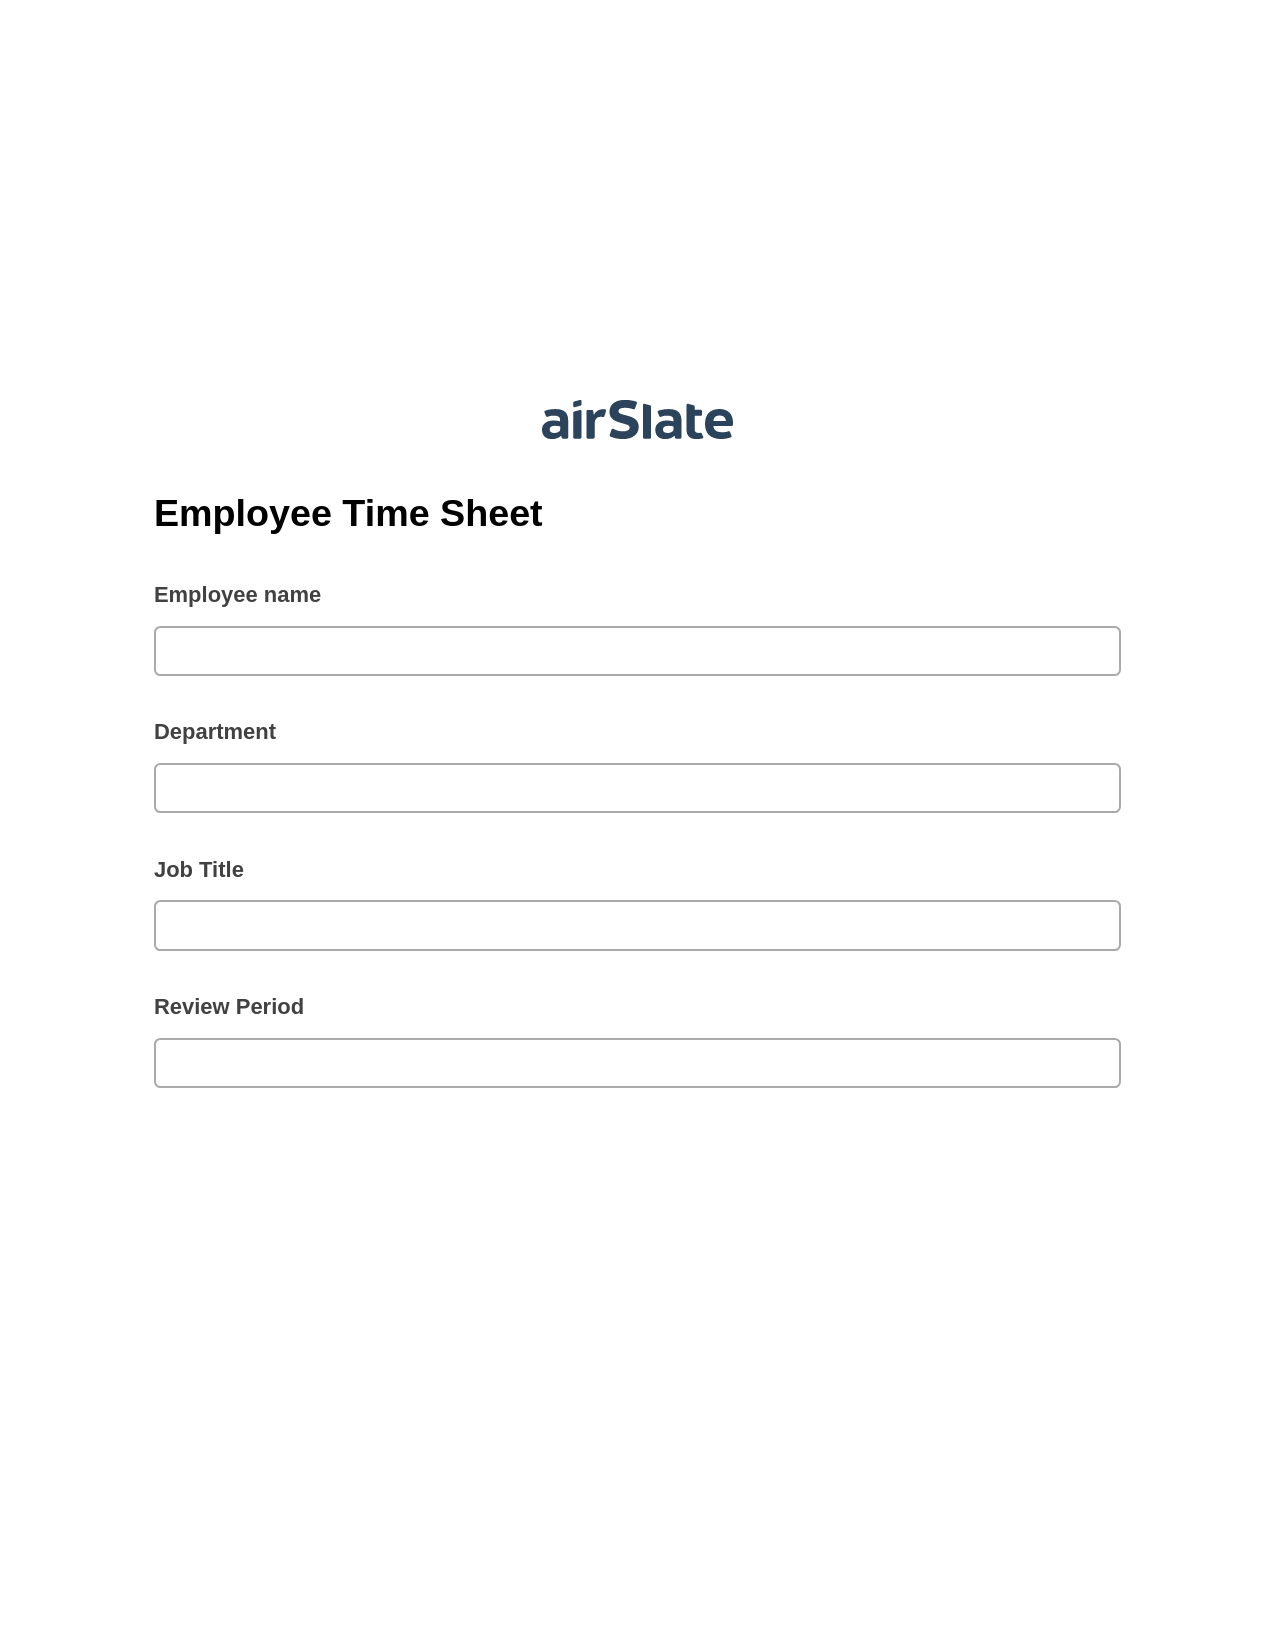 Multirole Employee Time Sheet Pre-fill from another Slate Bot, Create Salesforce Records Bot, Export to Salesforce Record Bot